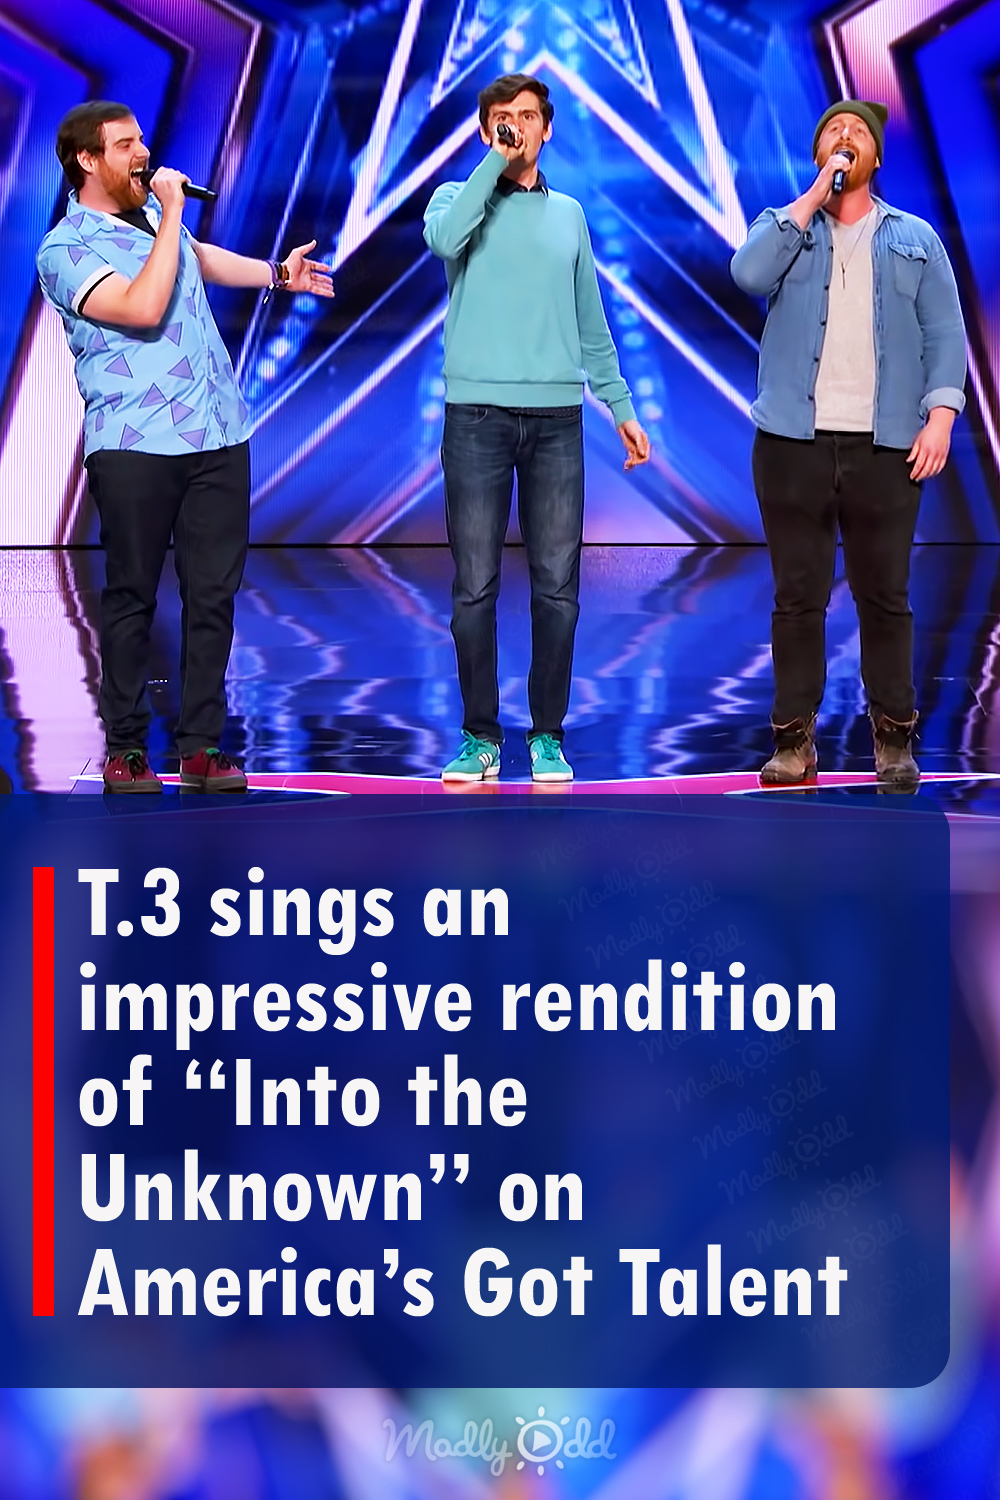 T.3 sings an impressive rendition of “Into the Unknown” on America’s Got Talent